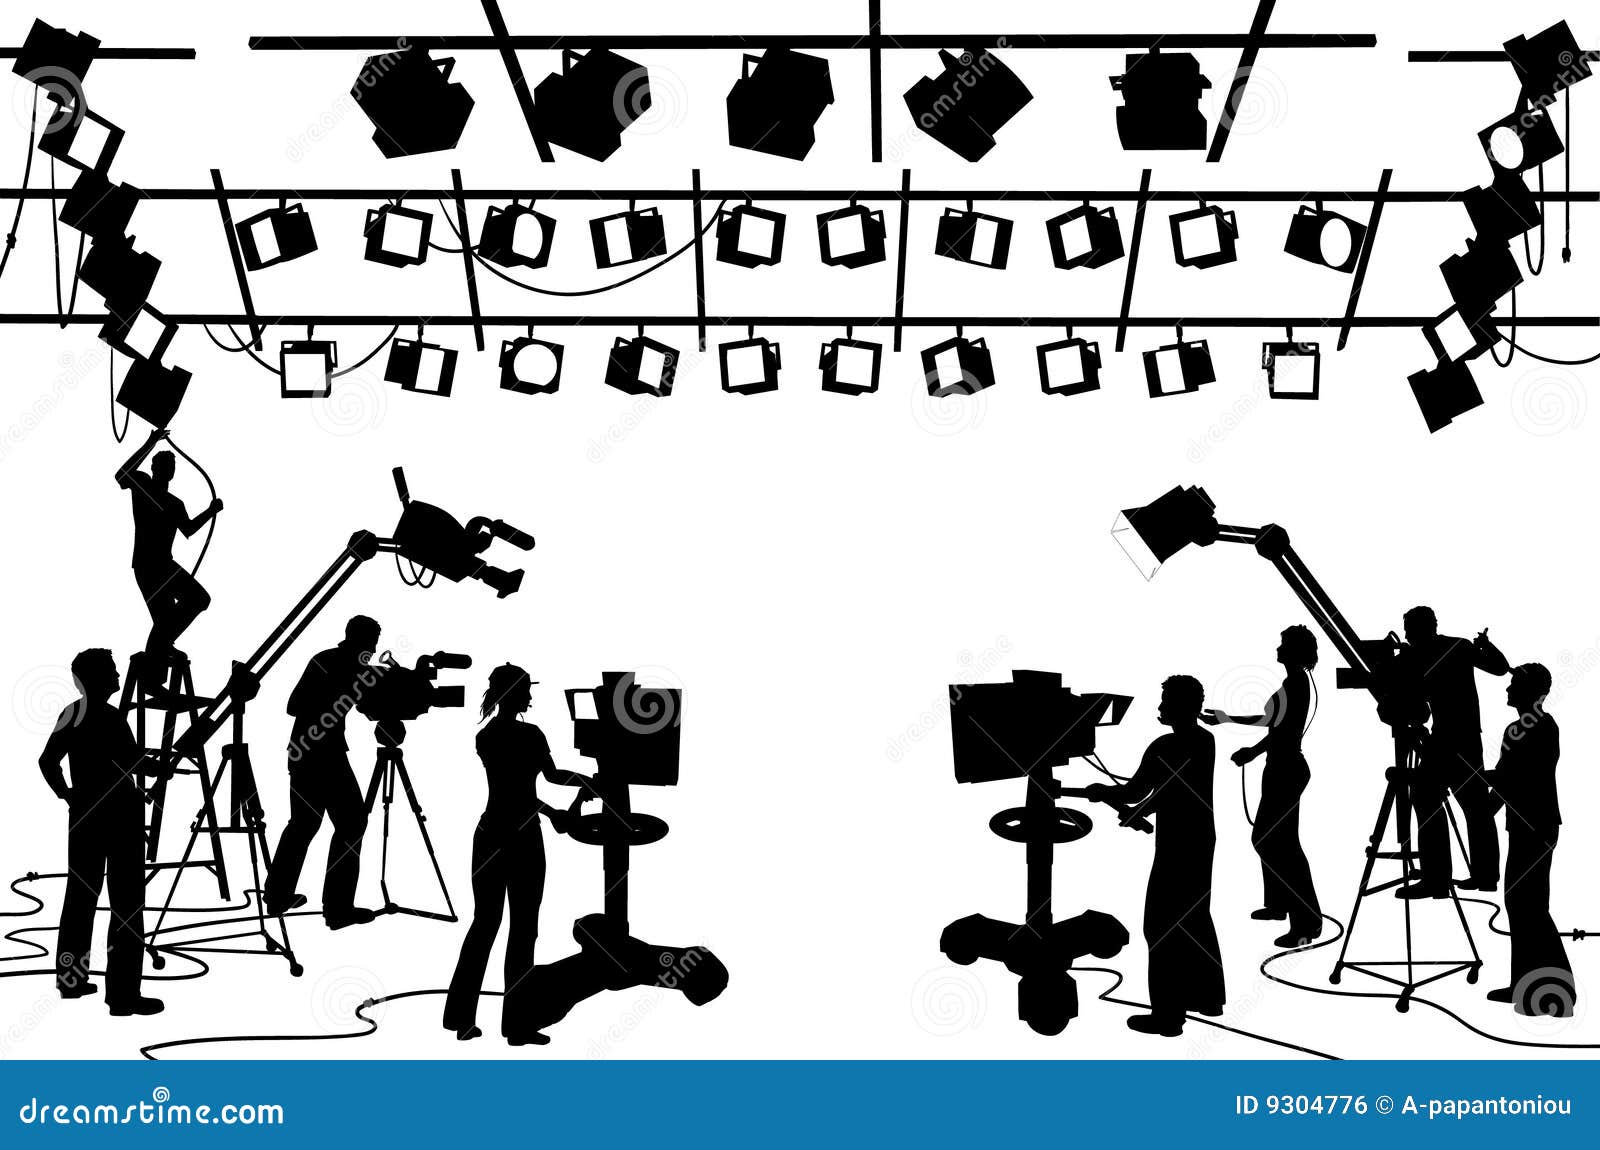 video production clipart - photo #40